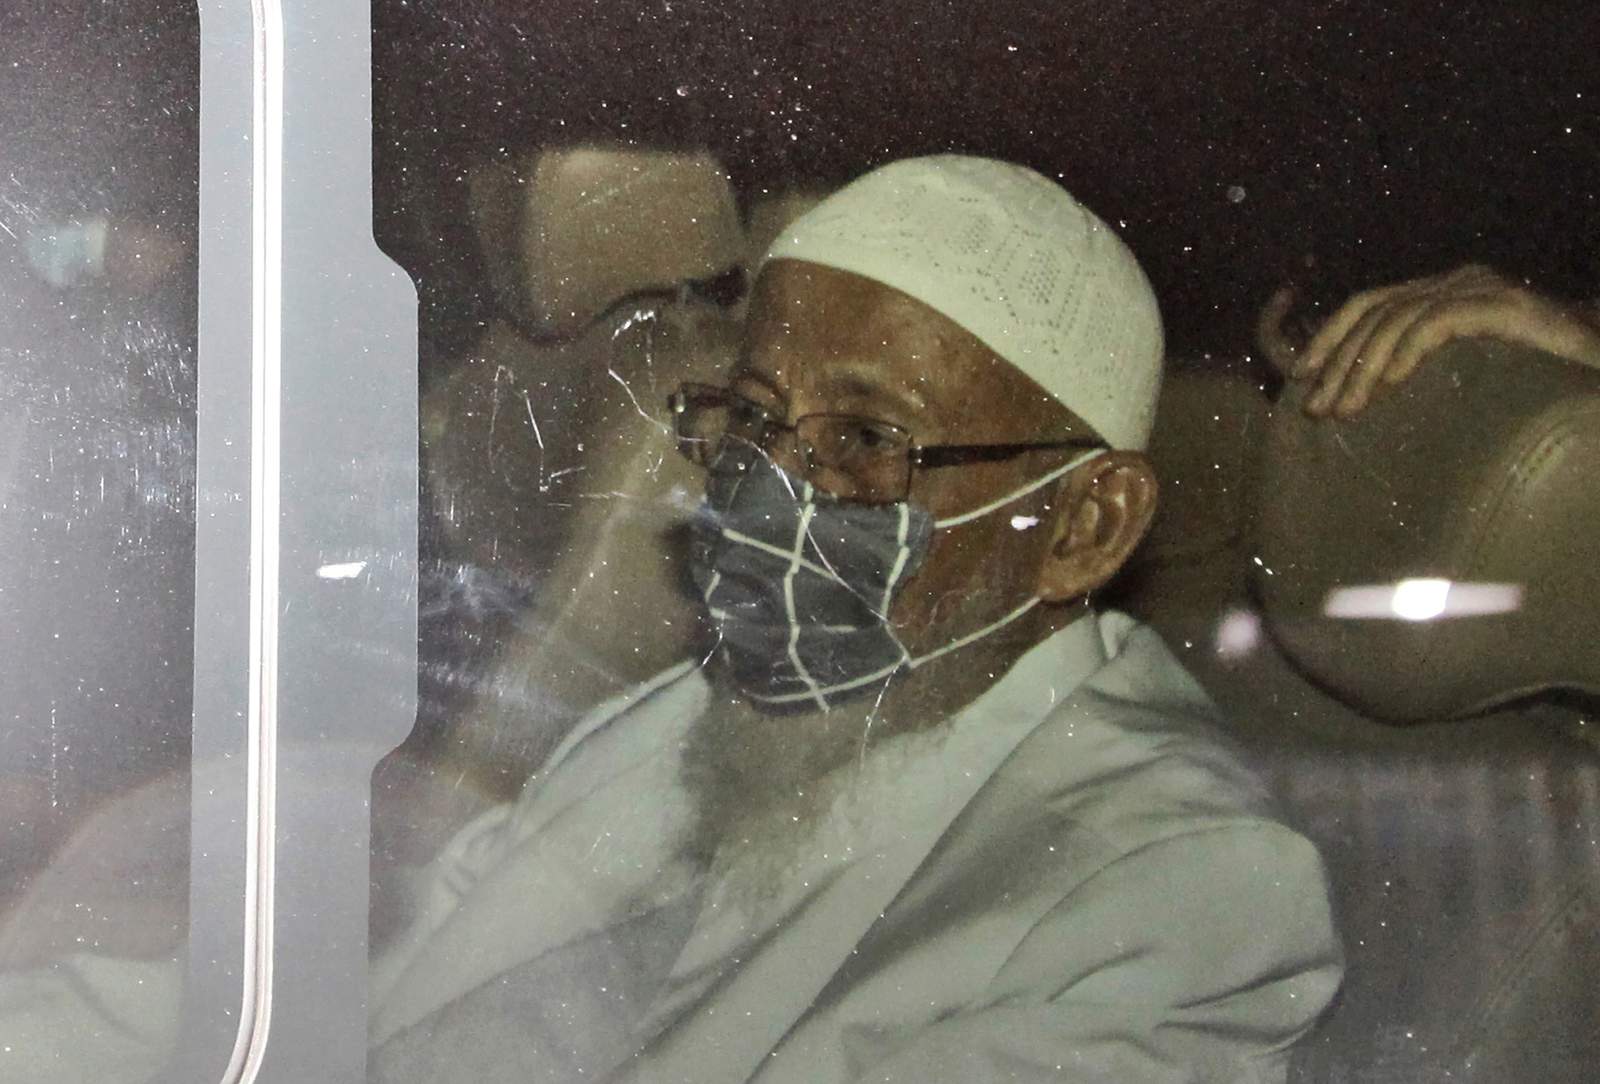 Indonesian cleric who inspired Bali bombings freed from jail